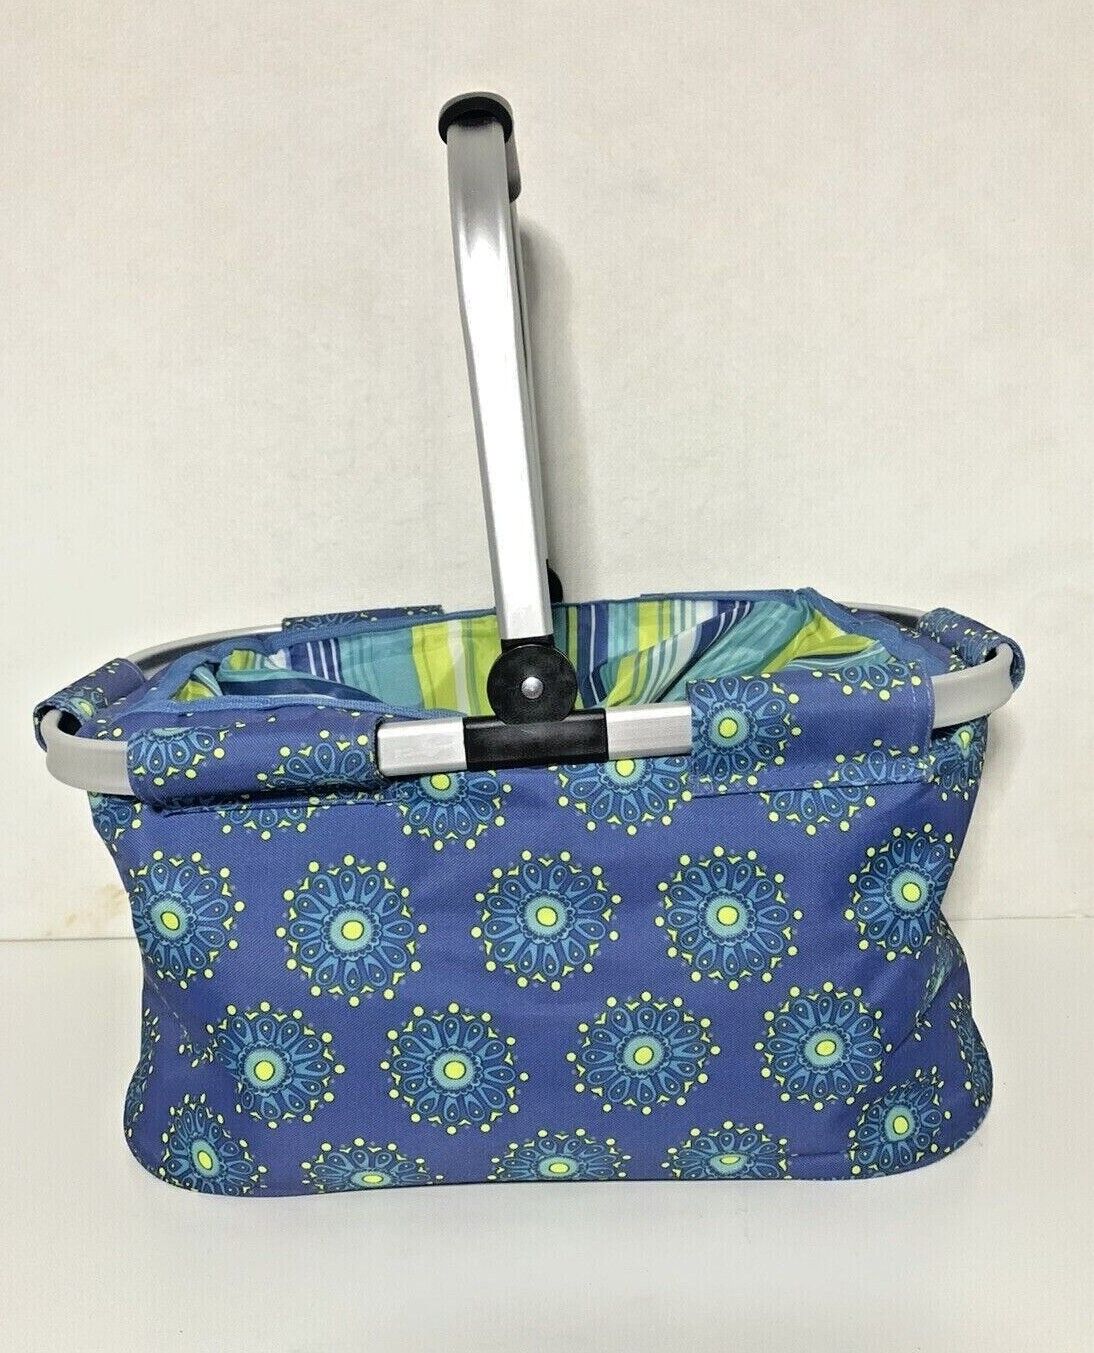 Cynthia Rowley Insulated Collapsible Picnic Basket Blue Green Paisley & Stripe